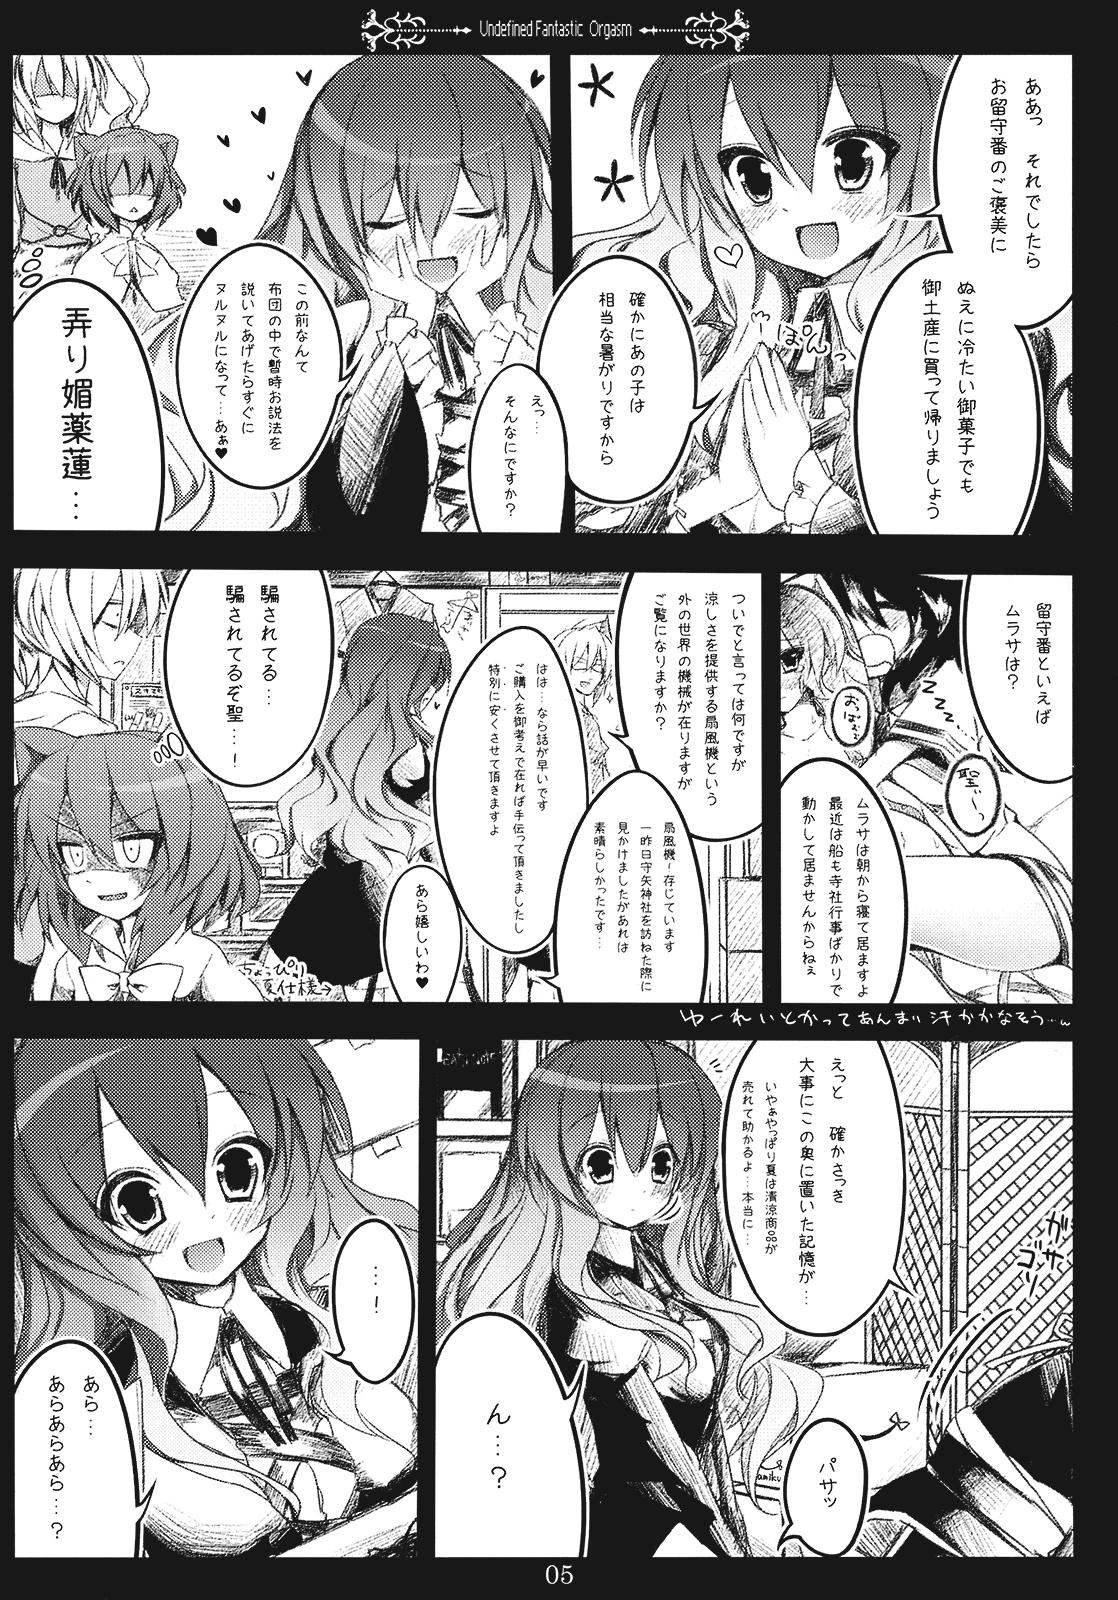 POV Undefined Fantastic Orgasm - Touhou project Bus - Page 5